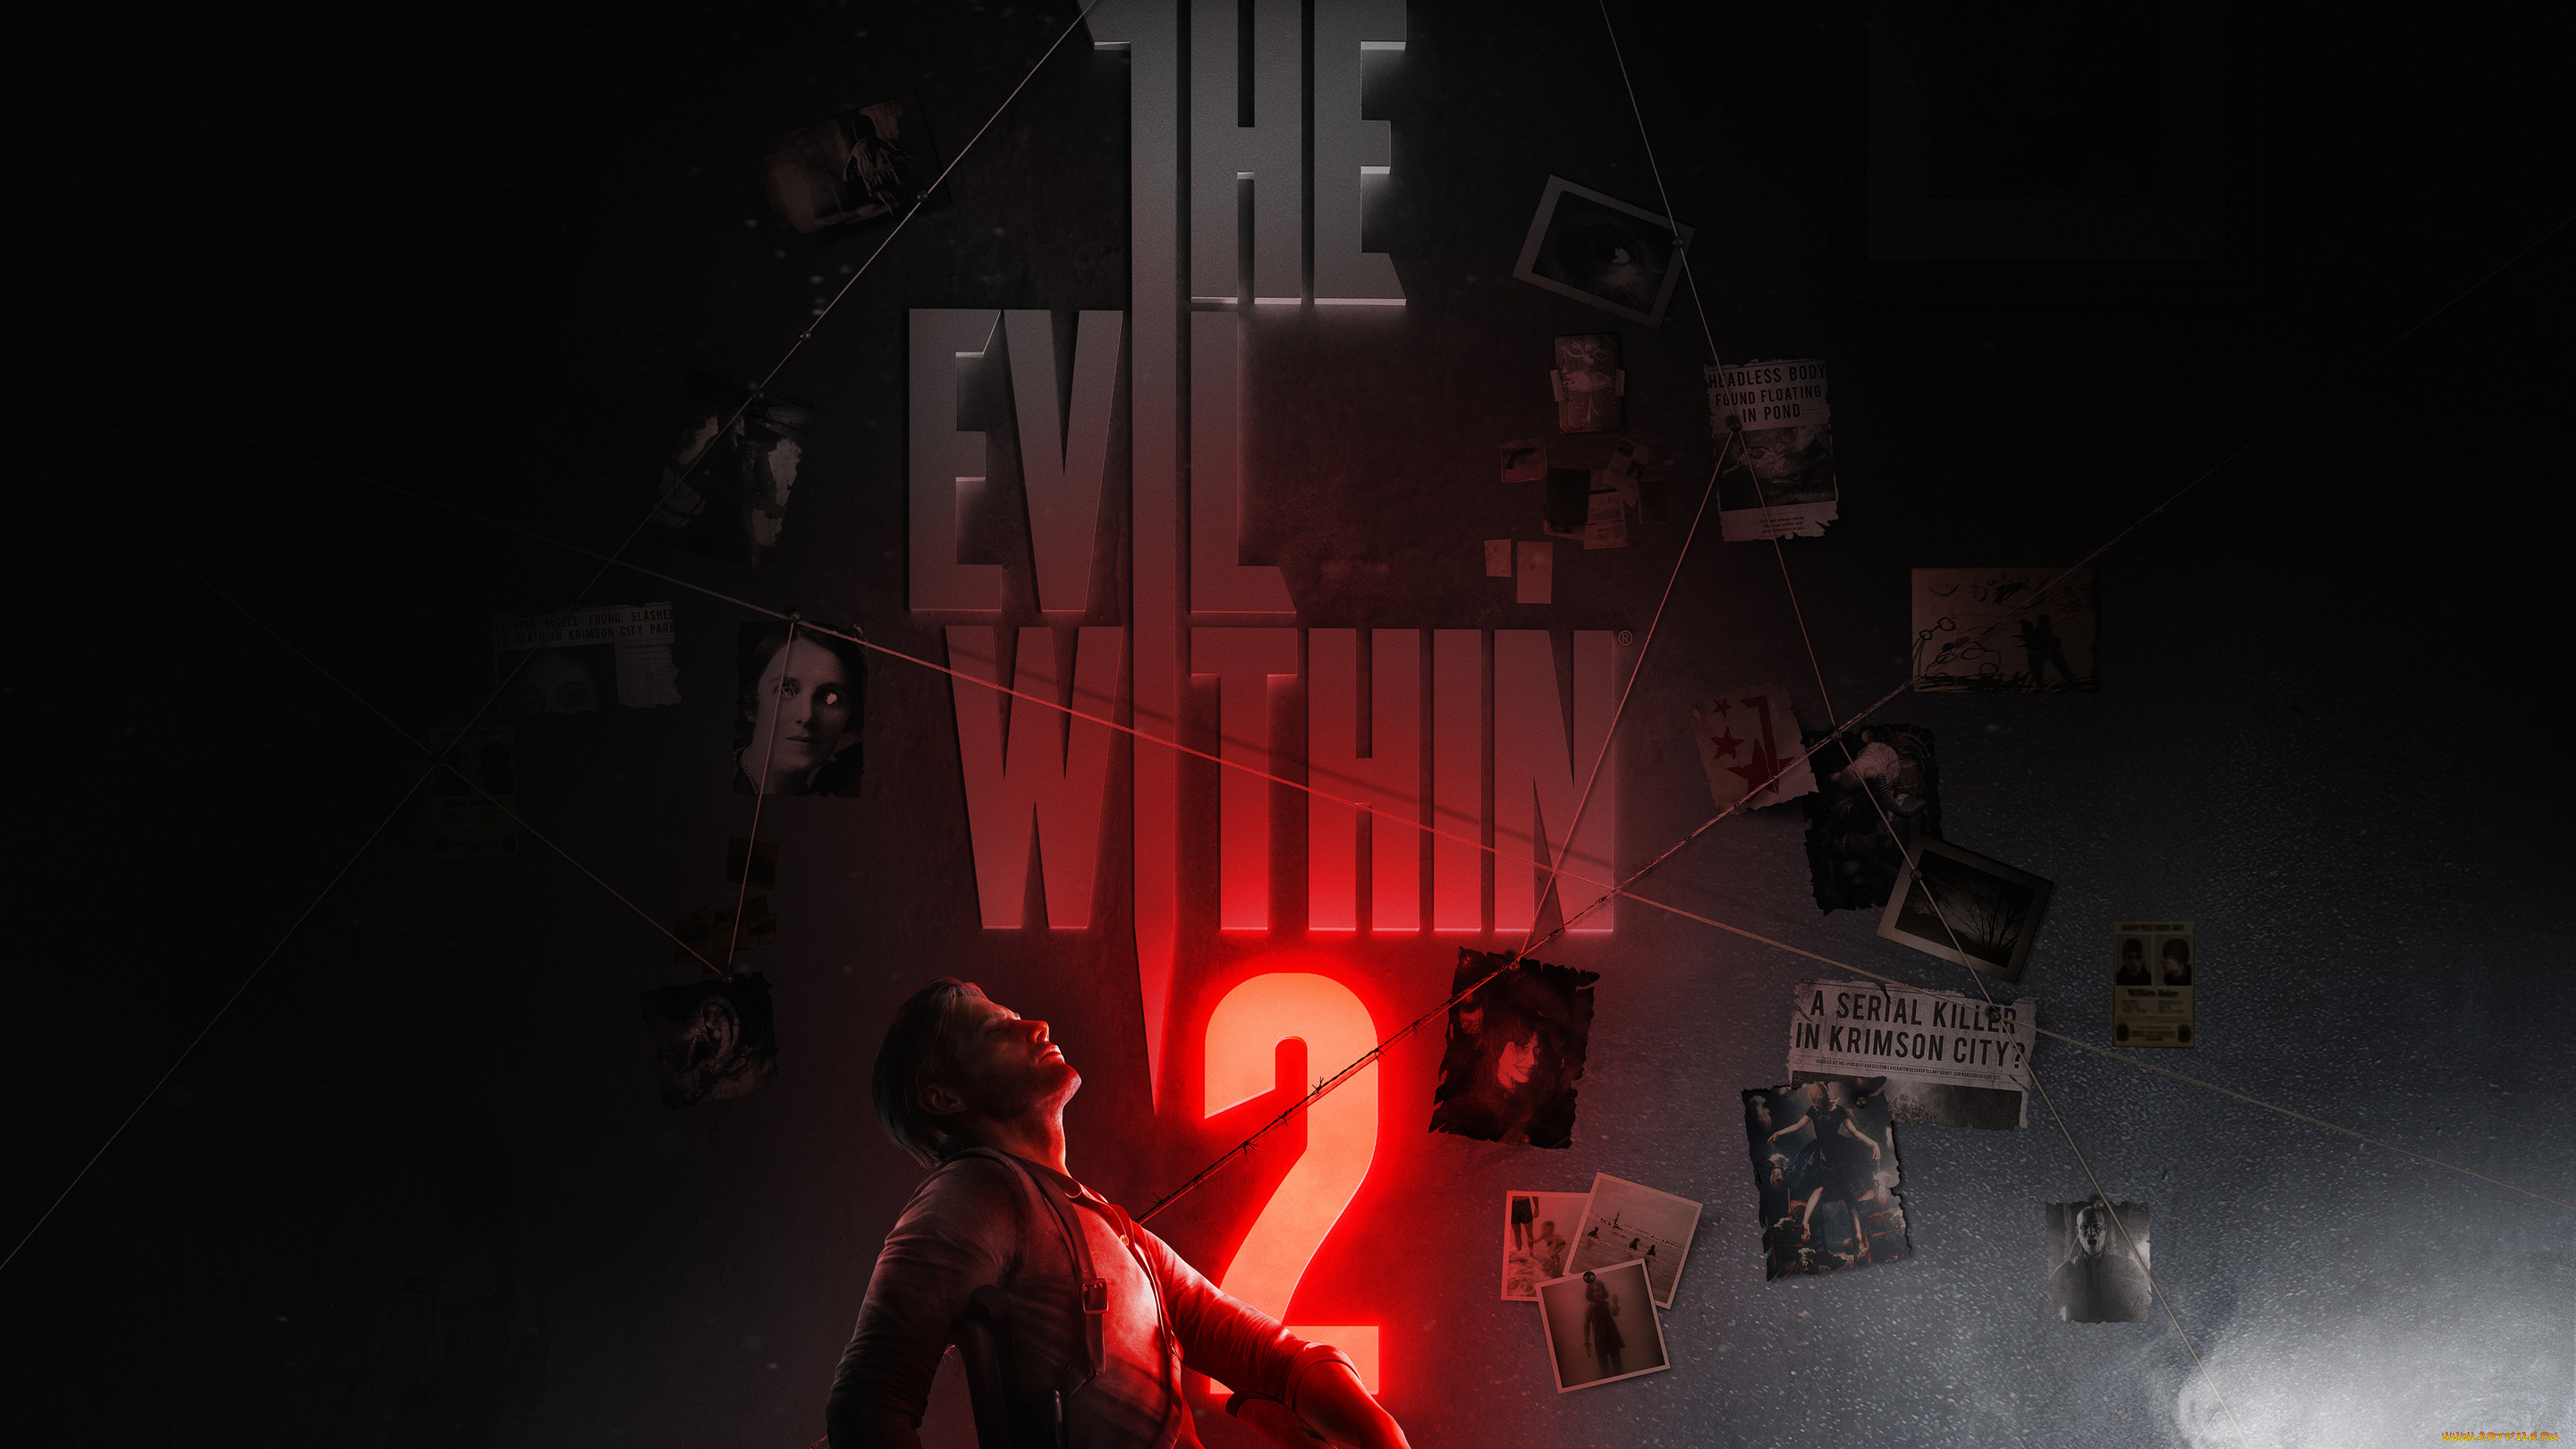  , the evil within 2, the, evil, within, 2, horror, action, 